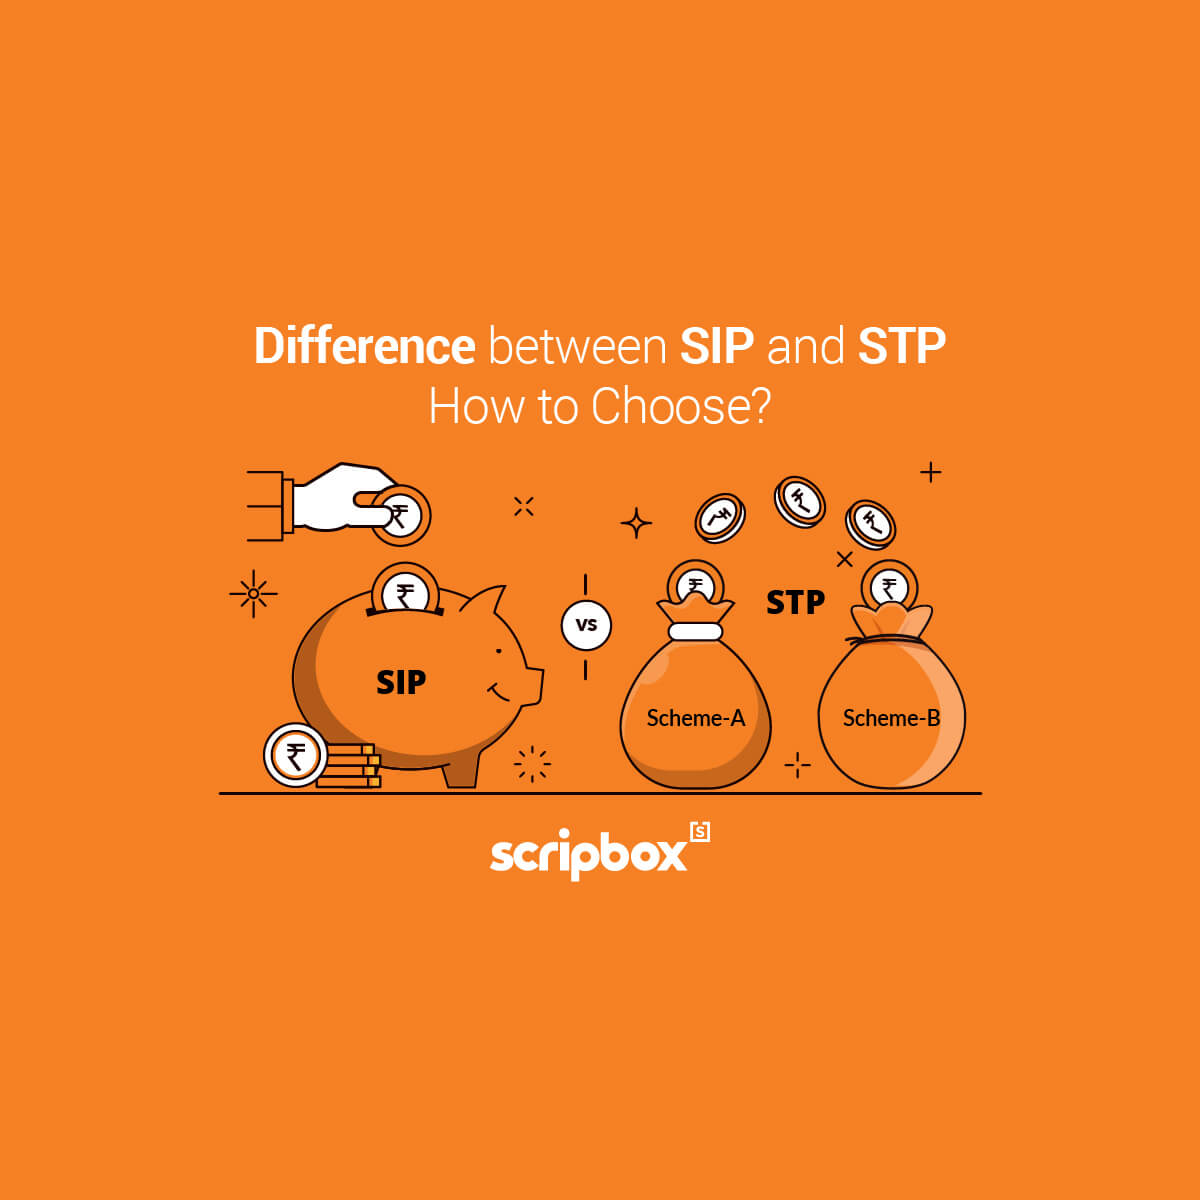 difference between sip and stp